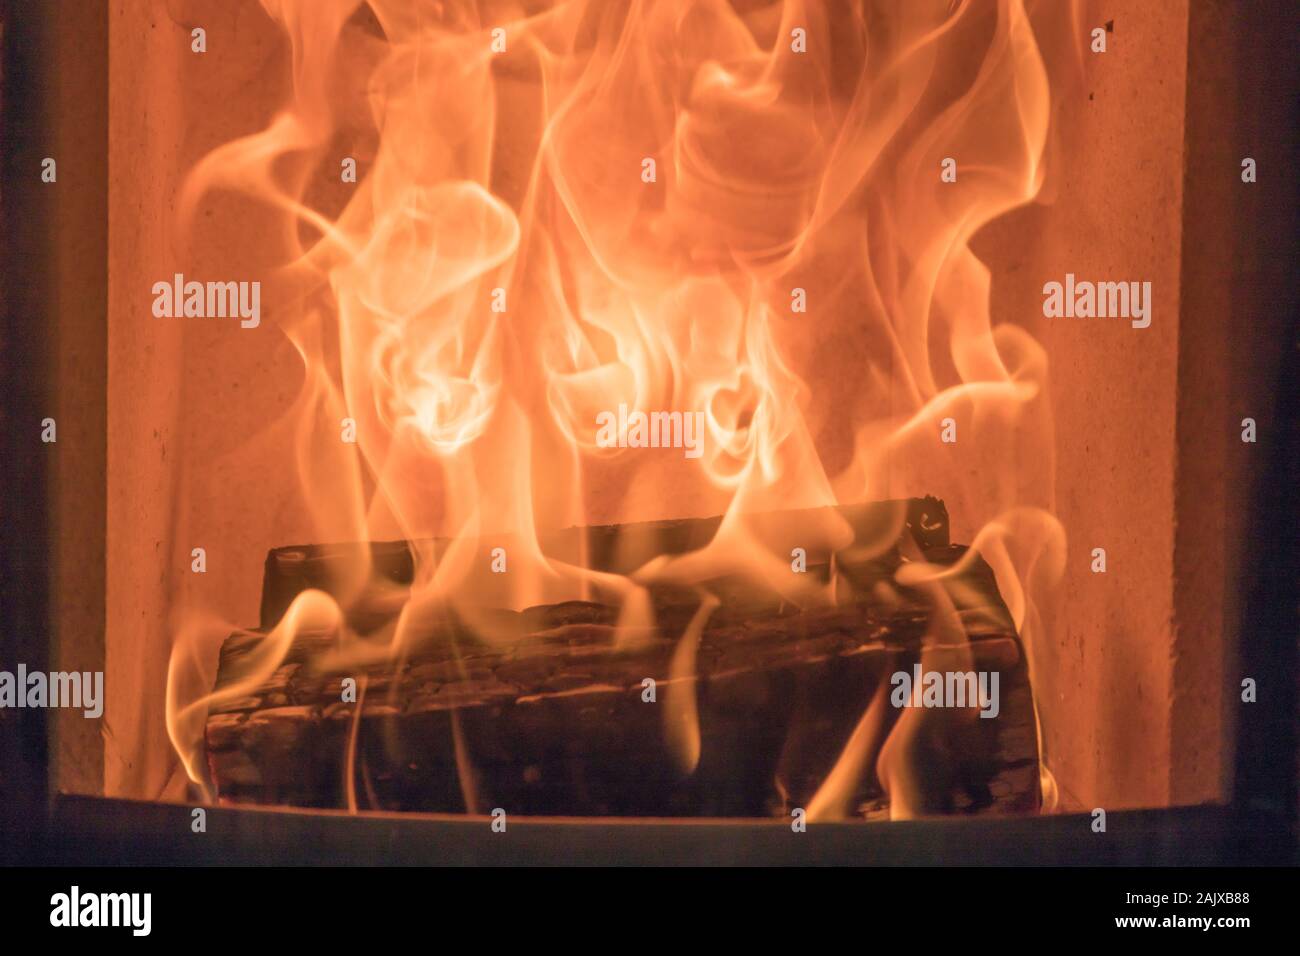 texture of fire in a wood stove Stock Photo